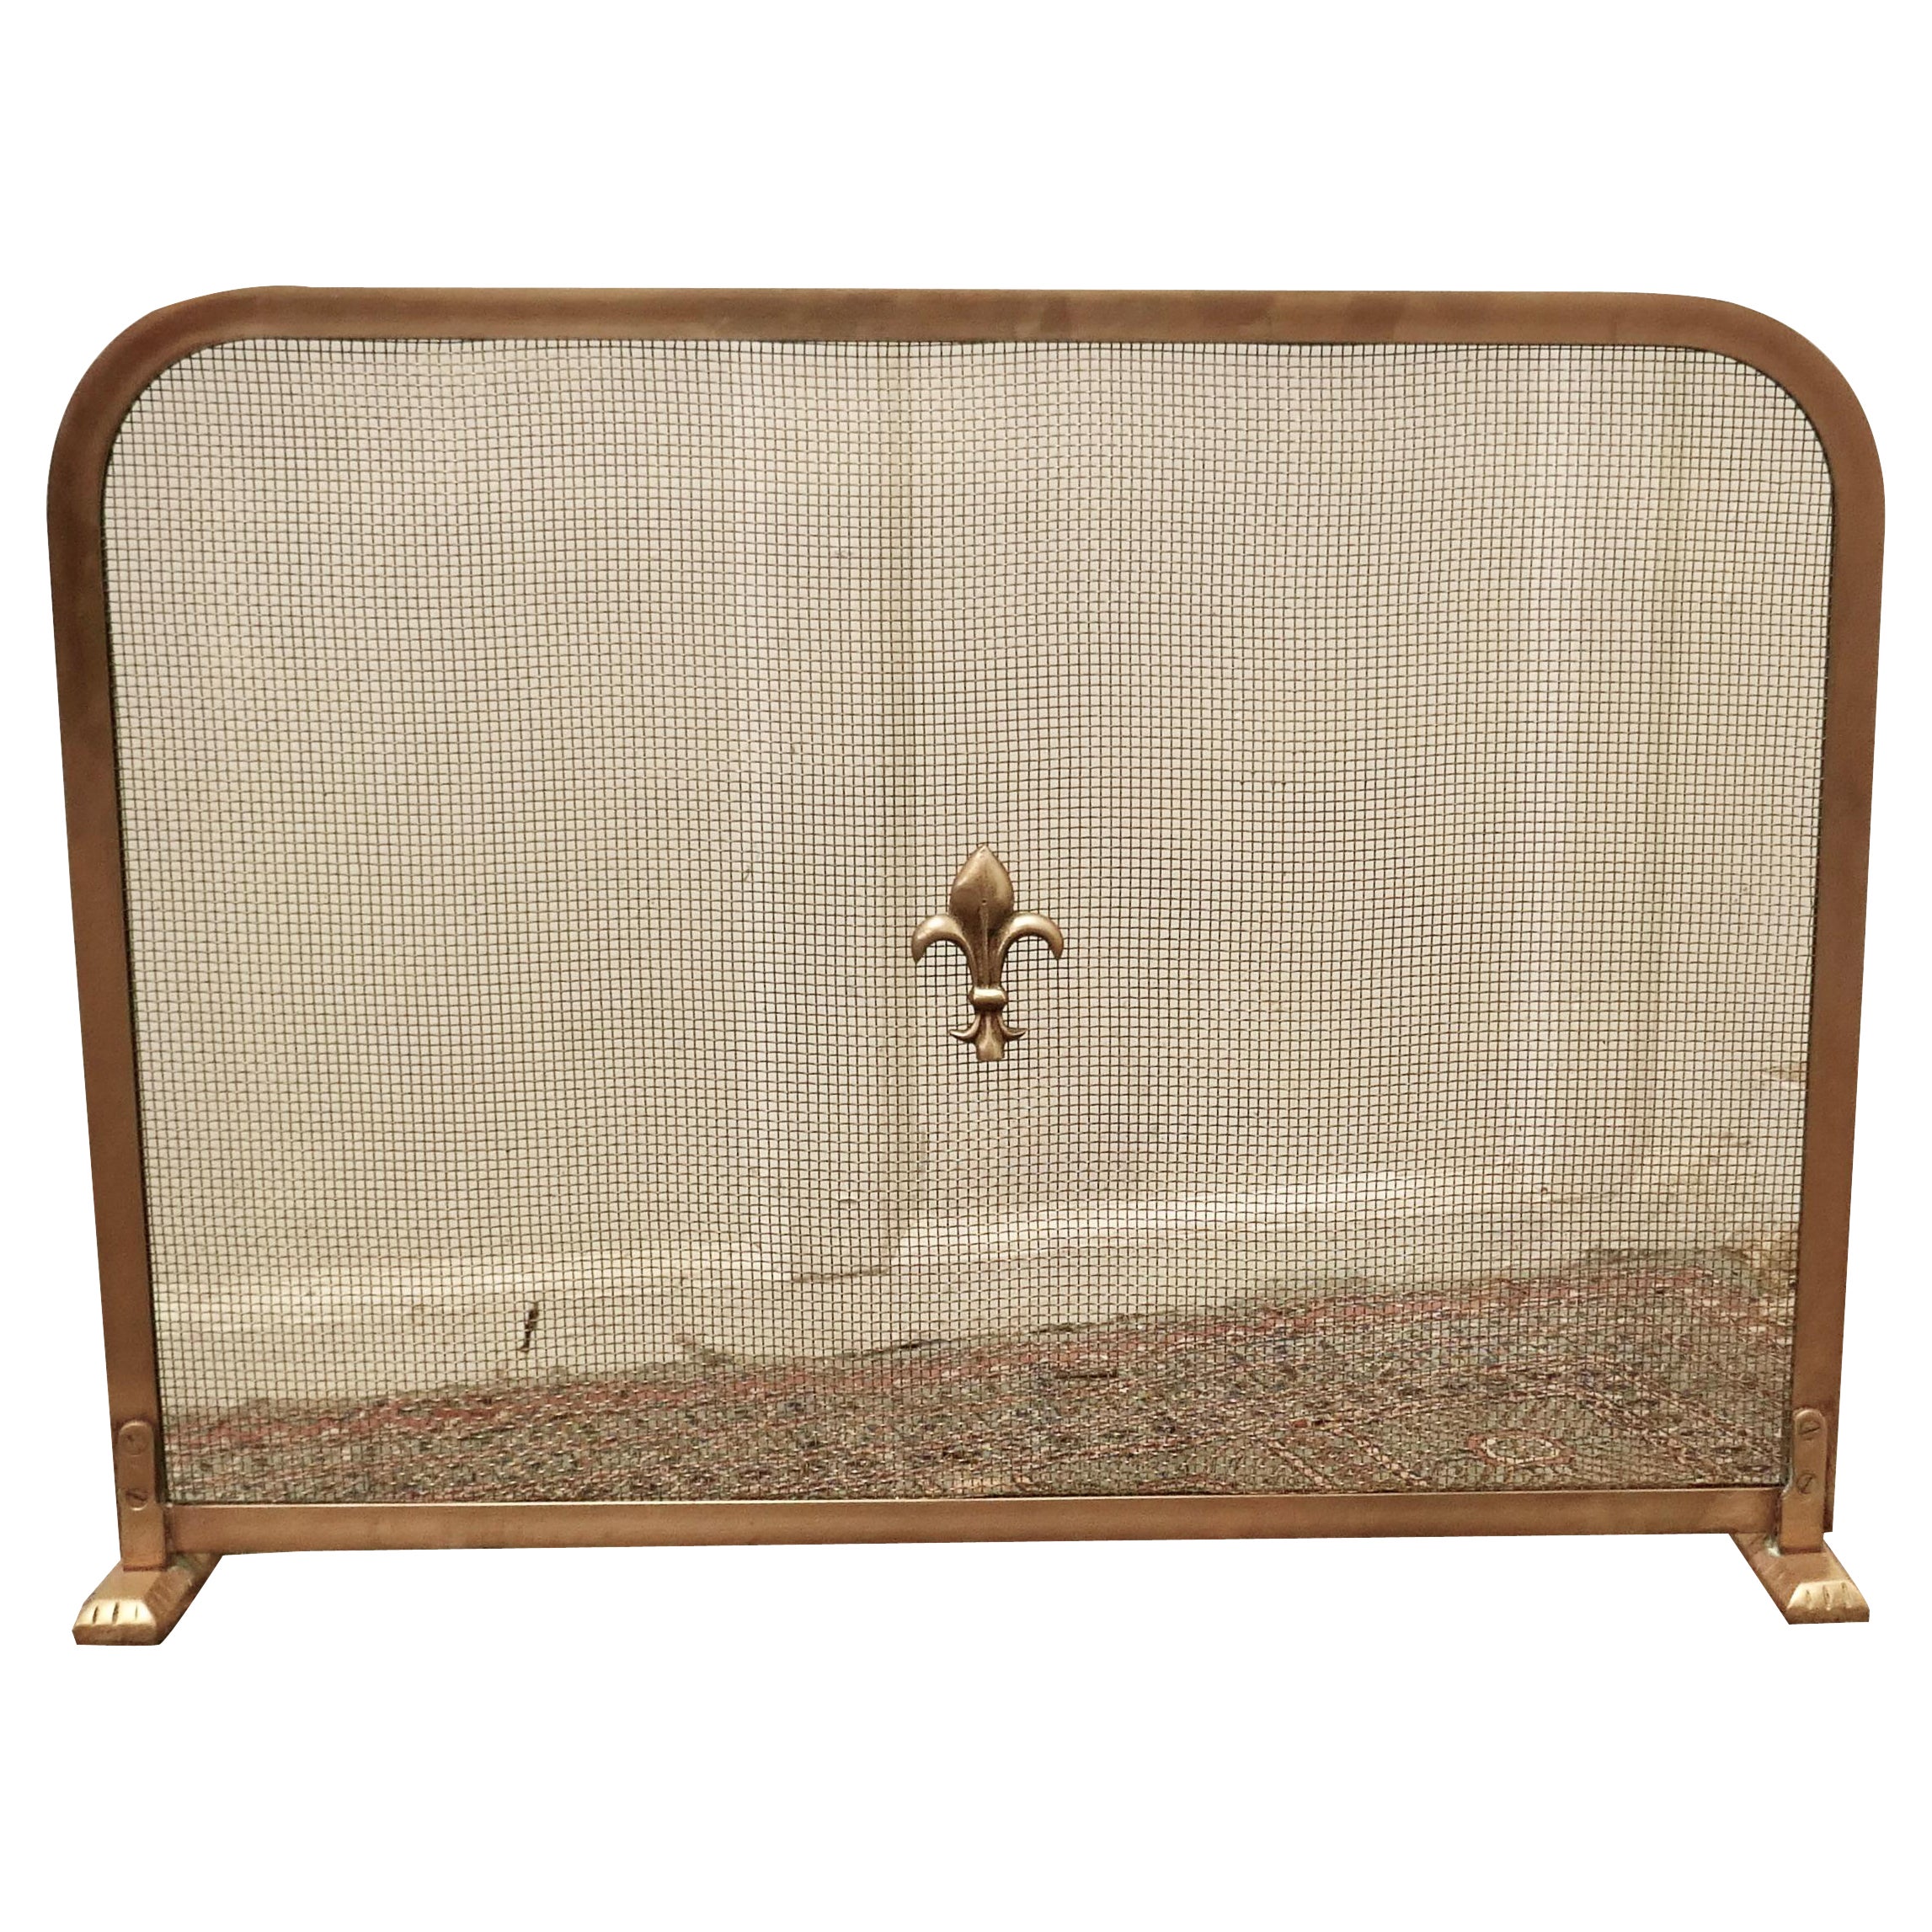 Victorian Arts and Crafts Brass Fire Guard, Spark Screen